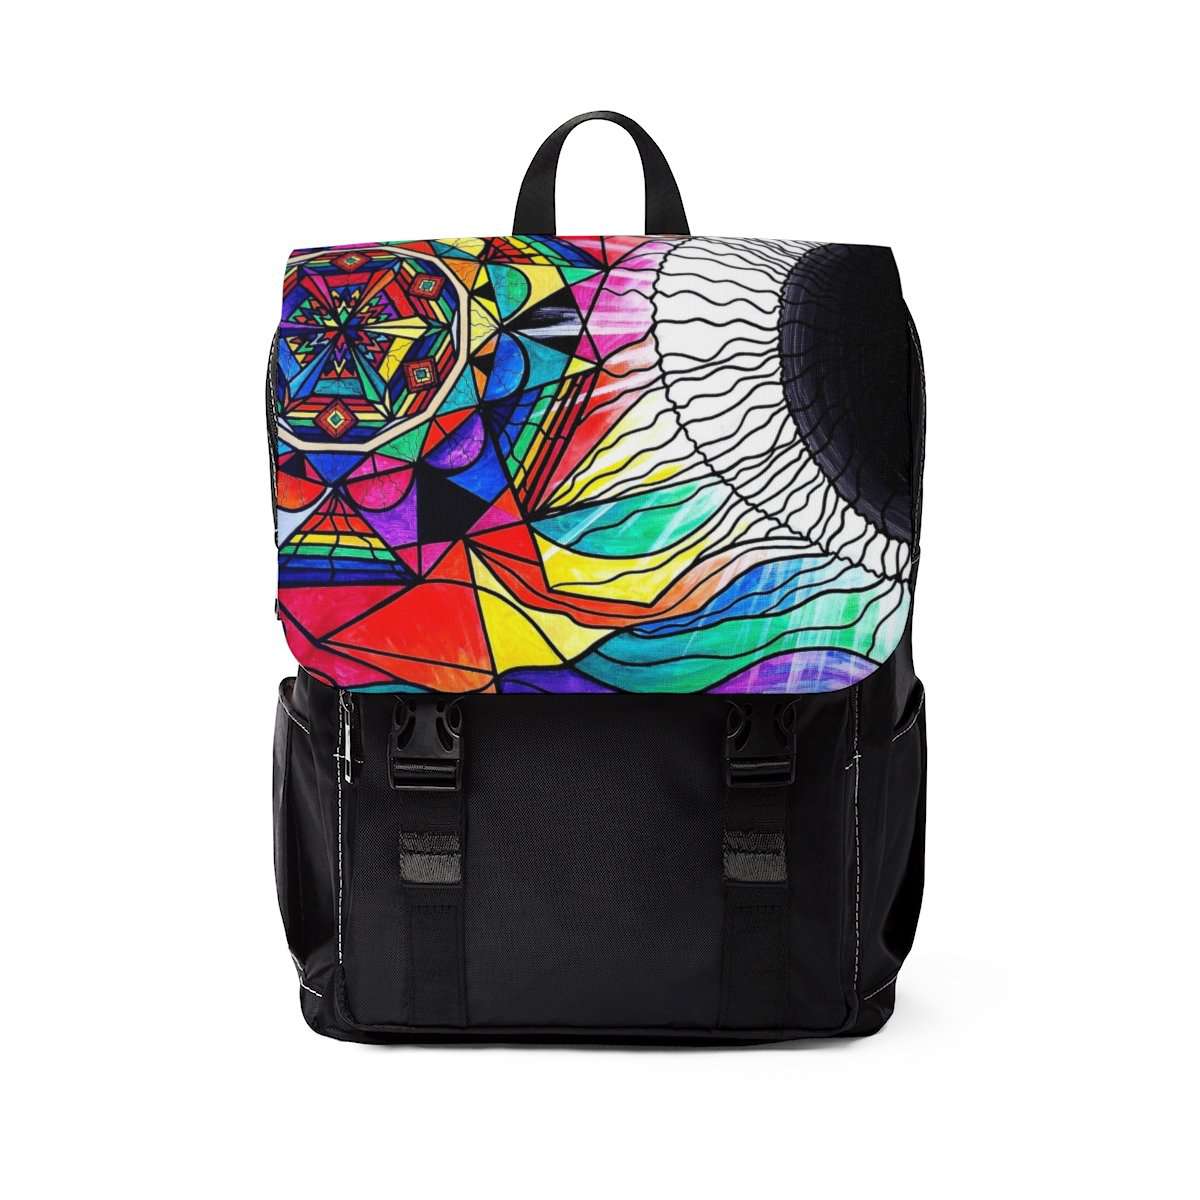 shop-the-official-online-store-of-return-to-source-unisex-casual-shoulder-backpack-on-sale_0.jpg